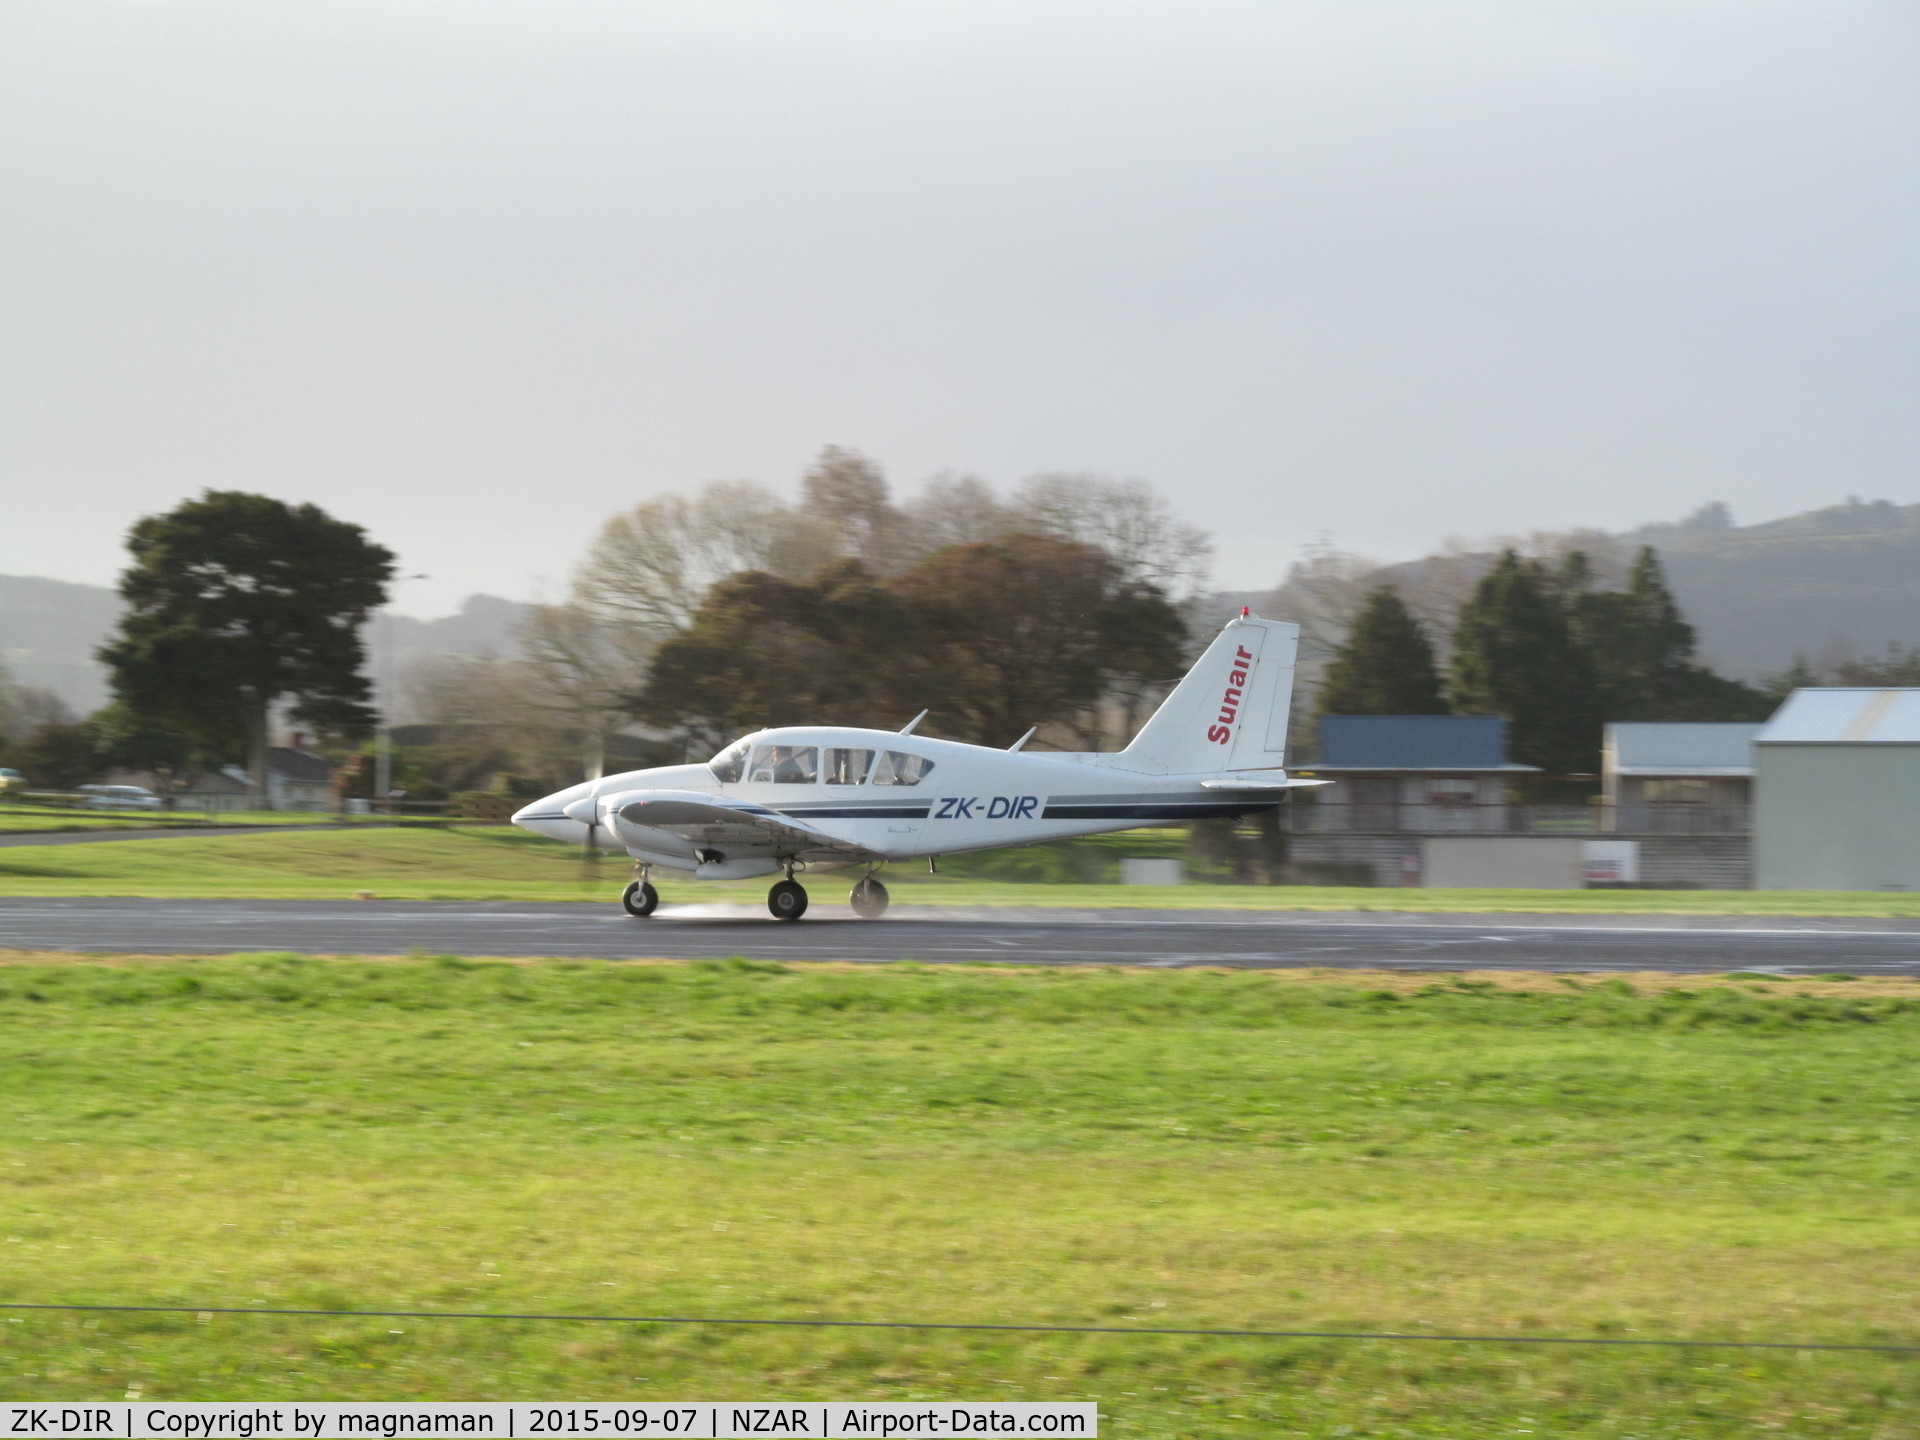 ZK-DIR, Piper PA-23-250 C/N 27-4242, about to lift off